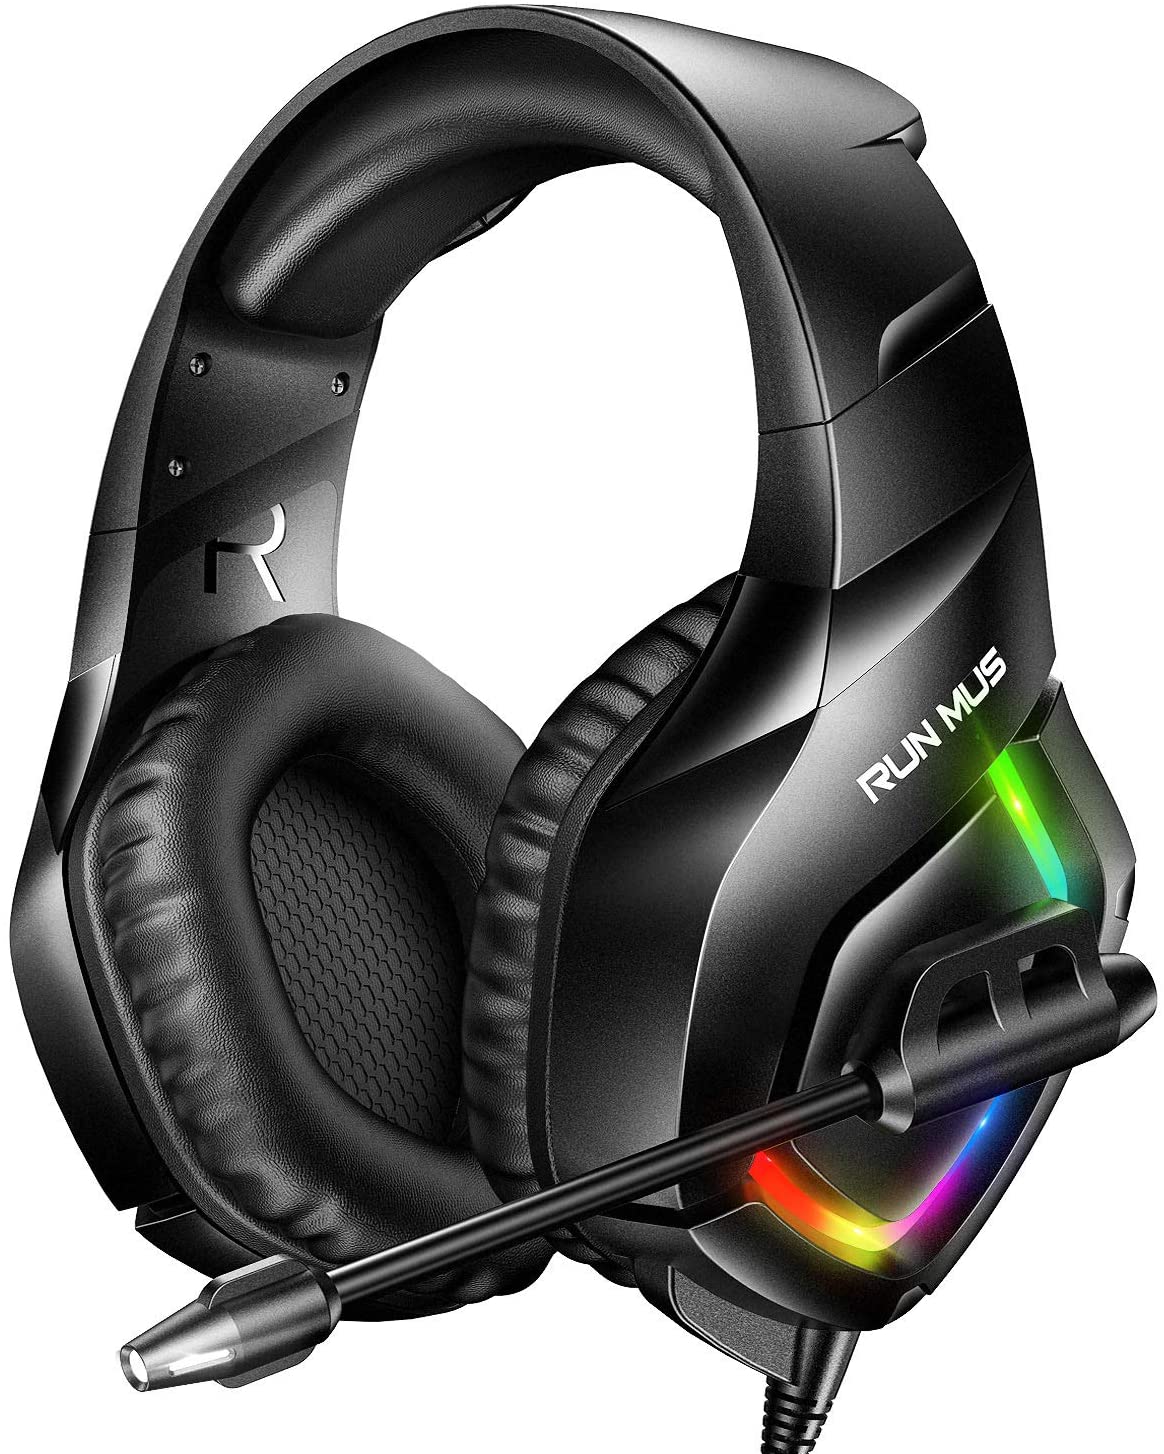 RUNMUS Gaming Headset PS4 Headset with 7.1 Surround Sound, Xbox One Headset with Noise Canceling Mic & RGB Light, Compatible w/ PS4, Xbox One(Adapter Not Included), PC, Laptop NS Game Boy Advance